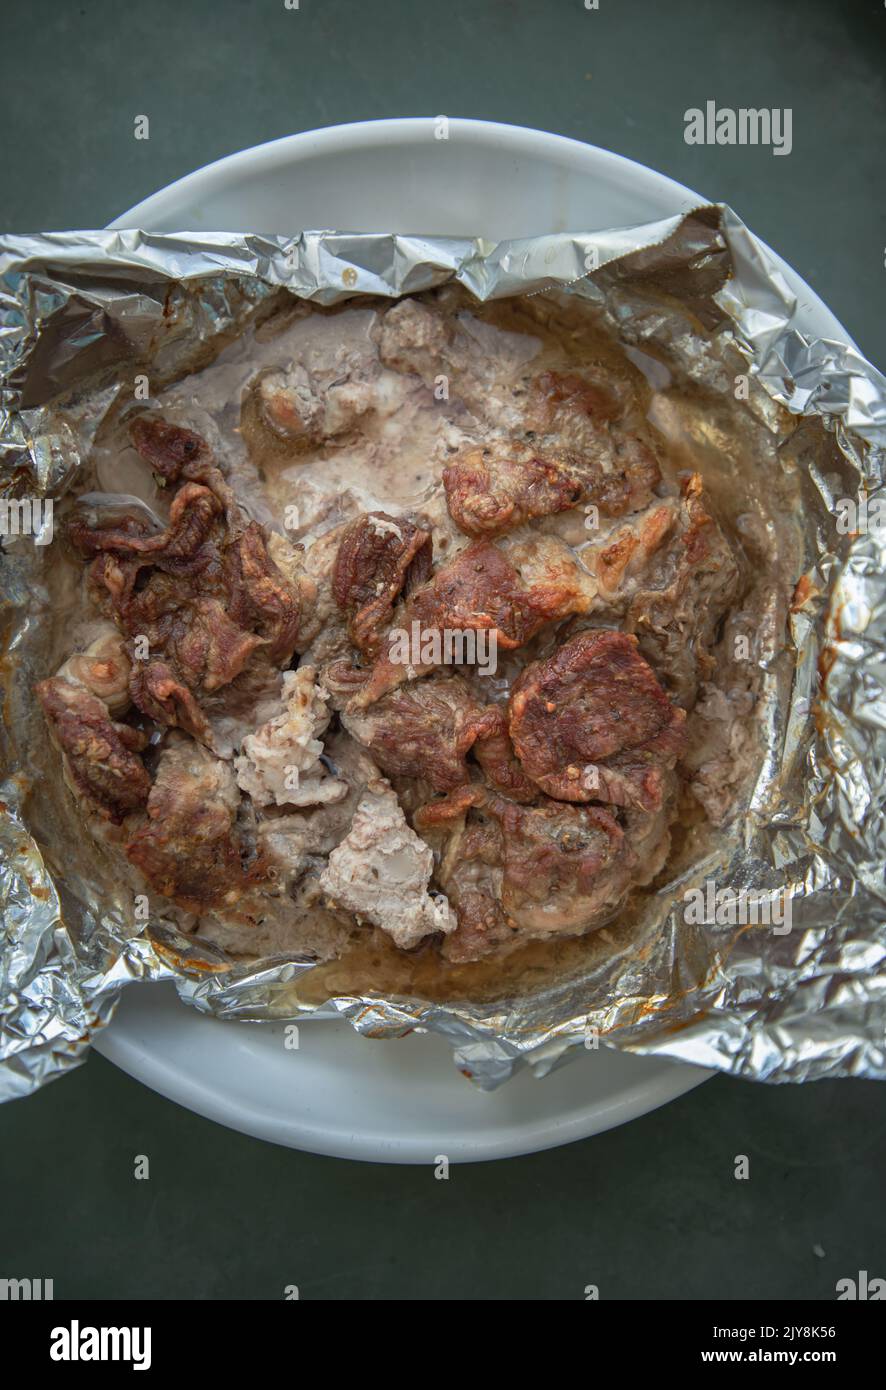 Baked juicy sliced meat is baked in foil. Spices and herbs are wrapped in foil. Cooking porks in the oven. Food for weekends and holidays, Copy spac Stock Photo